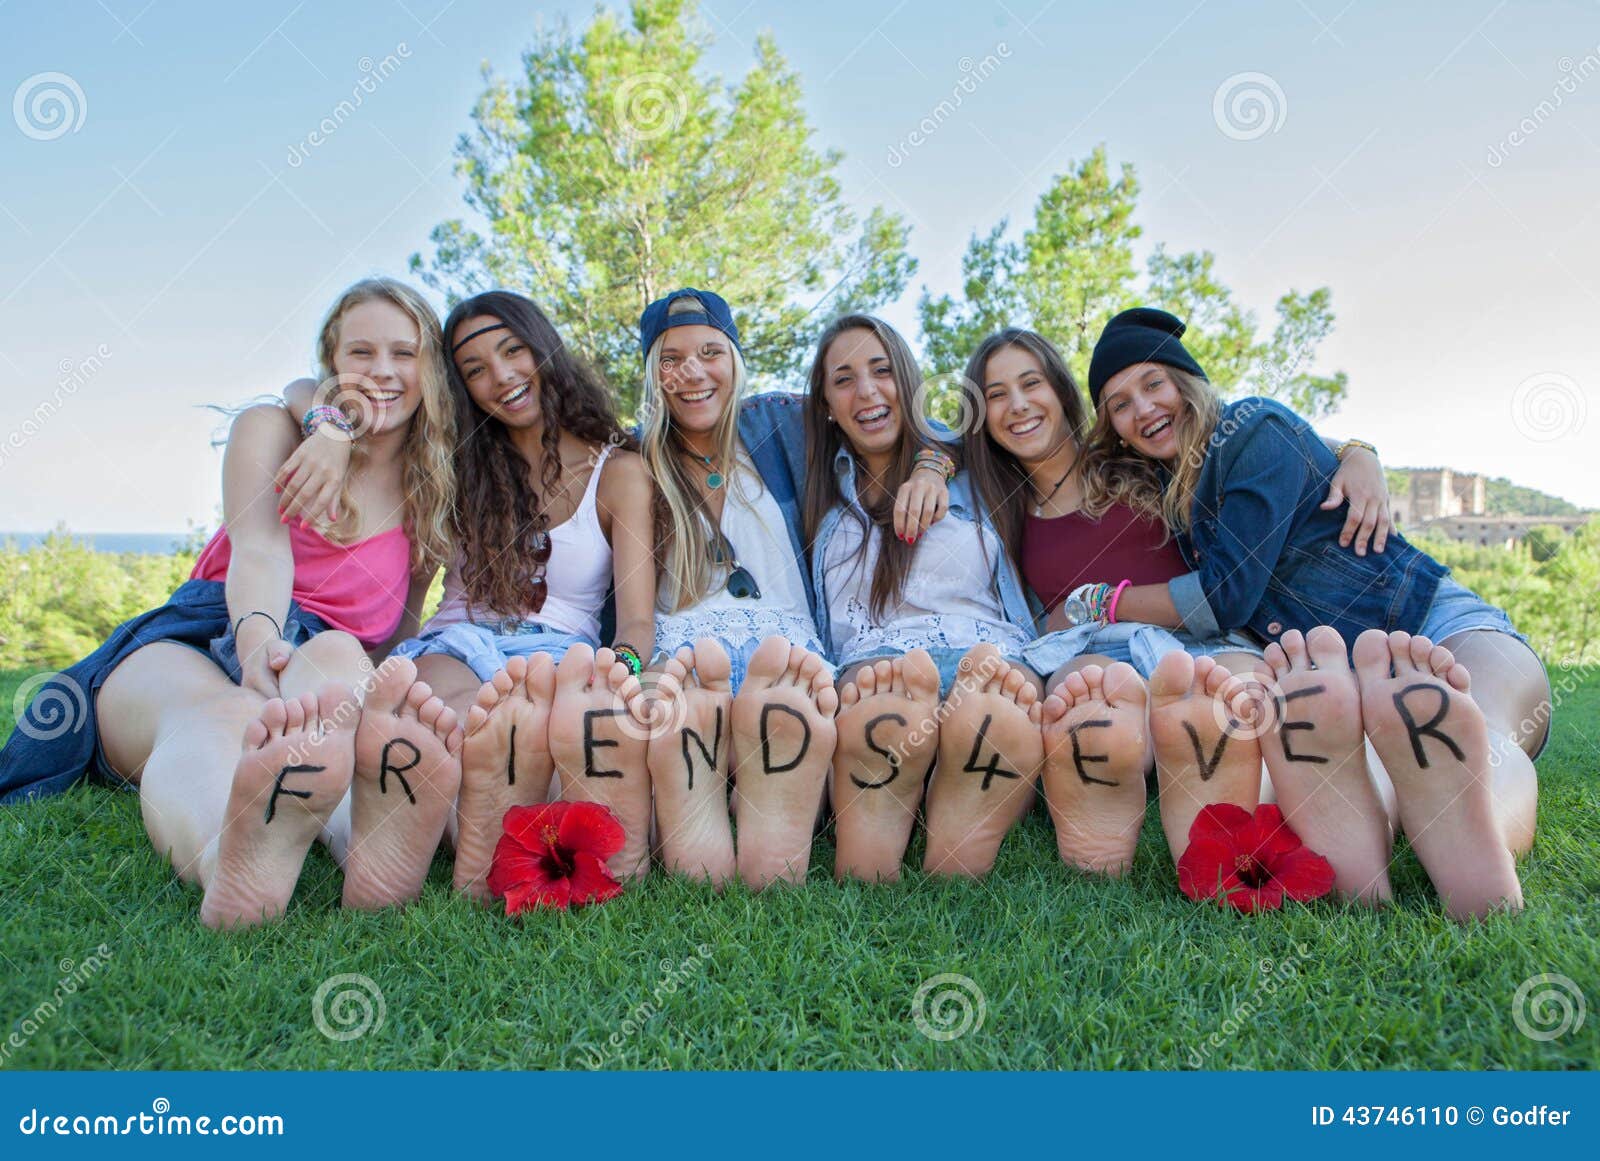 group of happy girls friends for ever